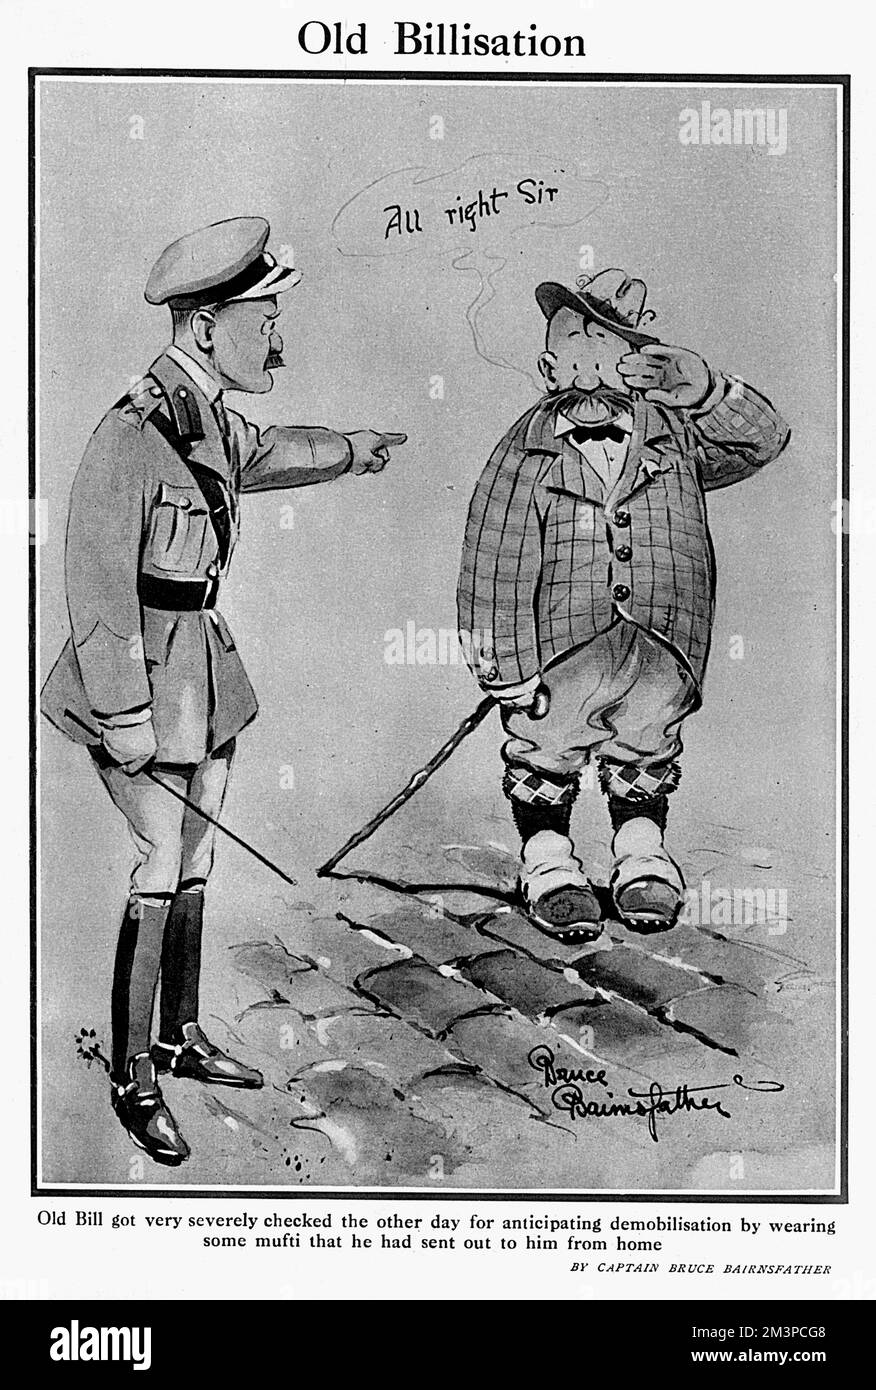 'Old Bill got very severely checked the other day for anticipating demobilisation by wearing some mufti that he had sent out to him from home.'    Old Bill, the soldier character created by Captain Bruce Bairnsfather in The Bystander, is reprimanded for being a bit premature changing into civilian clothes in anticipation of demobilisation at the end of the war.       Date: 1919 Stock Photo